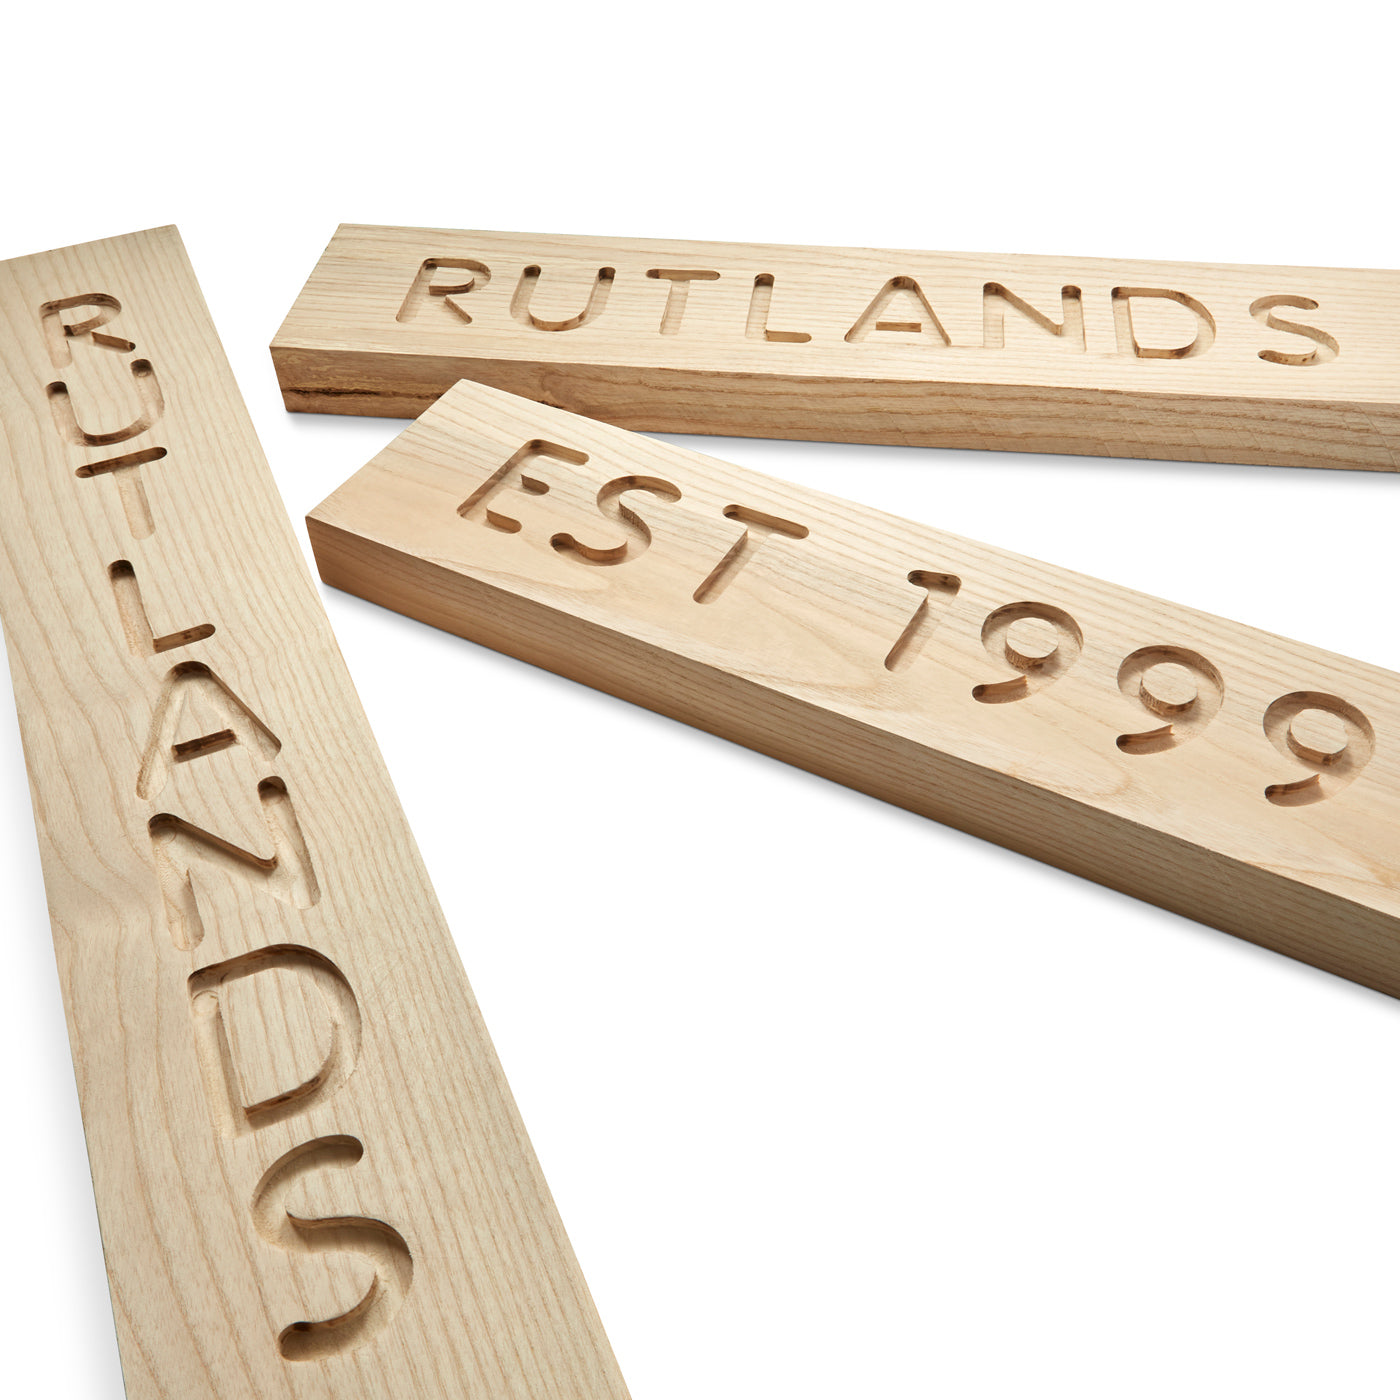 Router Sign Making Jigs  Next Day Delivery – Rutlands Limited